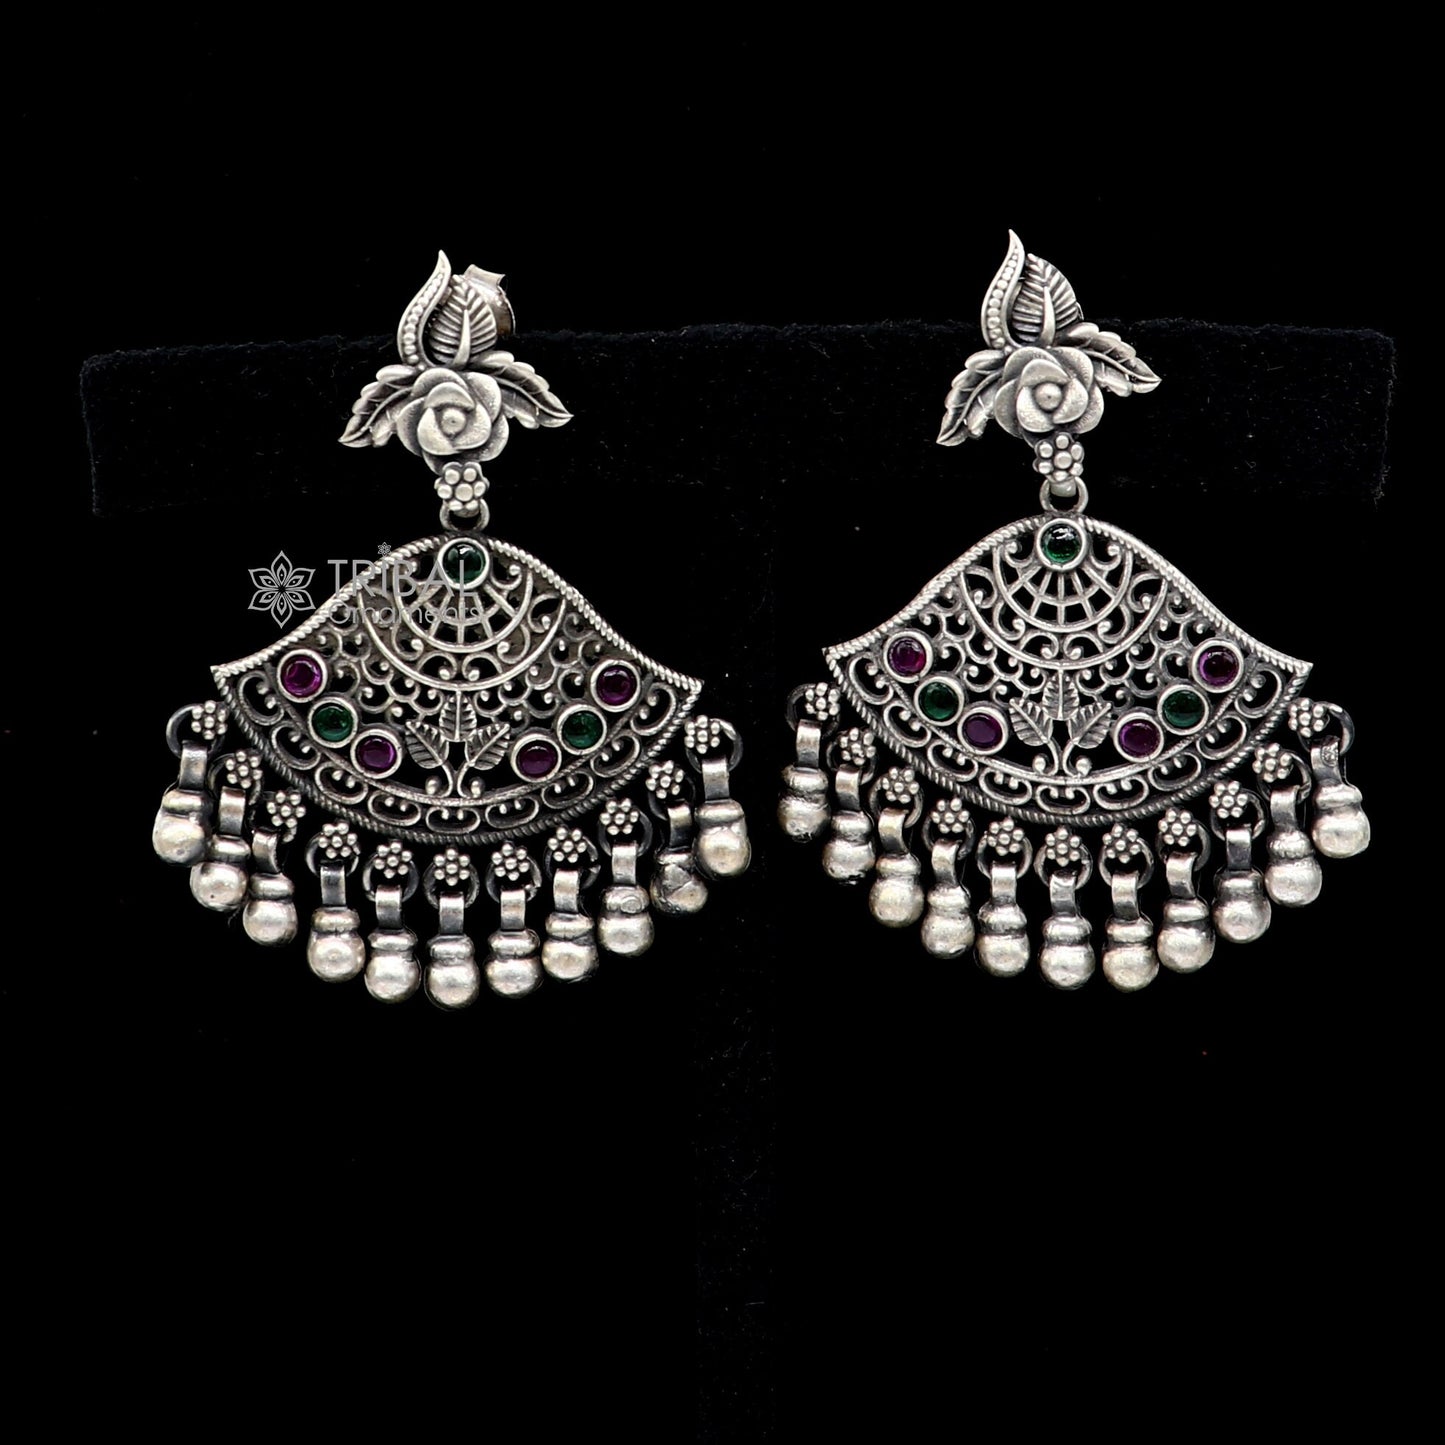 925 sterling silver handmade floral design red & green stone earrings with hanging drops Ghungroo ethnic brides functional jewelry s1235 - TRIBAL ORNAMENTS